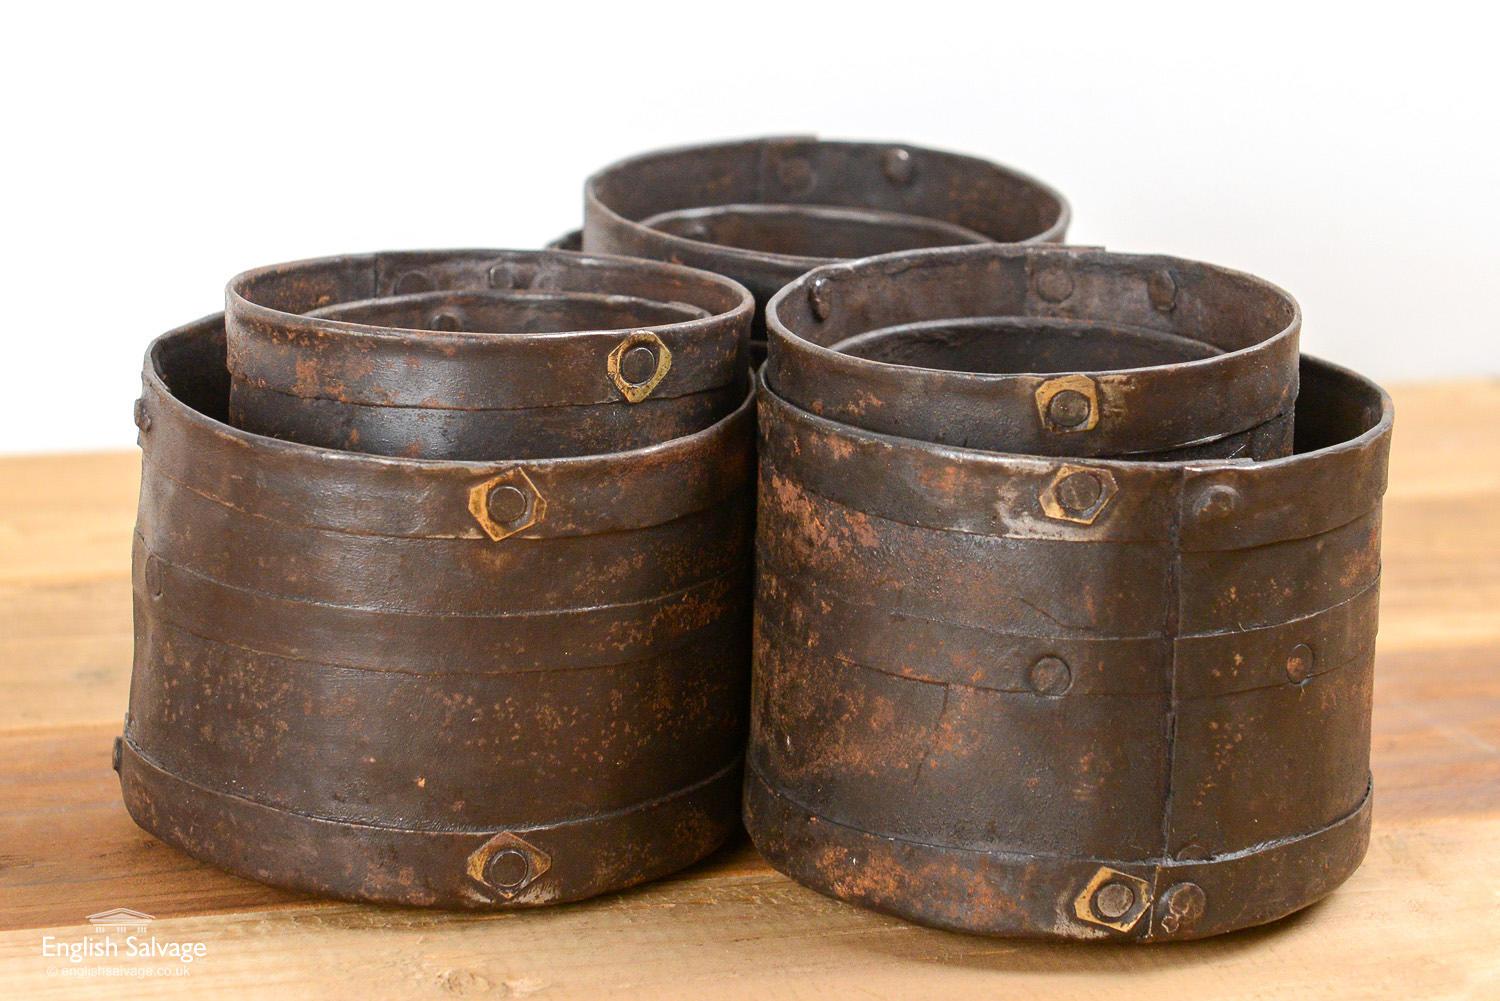 Indian studded iron rice measures. Each set contains a small, medium and large pot, rough sizes of each as follows. The small pots are 8cm diameter x 8cm high. The medium pots are 9.4cm diameter x 9.5cm high. The large pots are 11cm diameter x 8cm